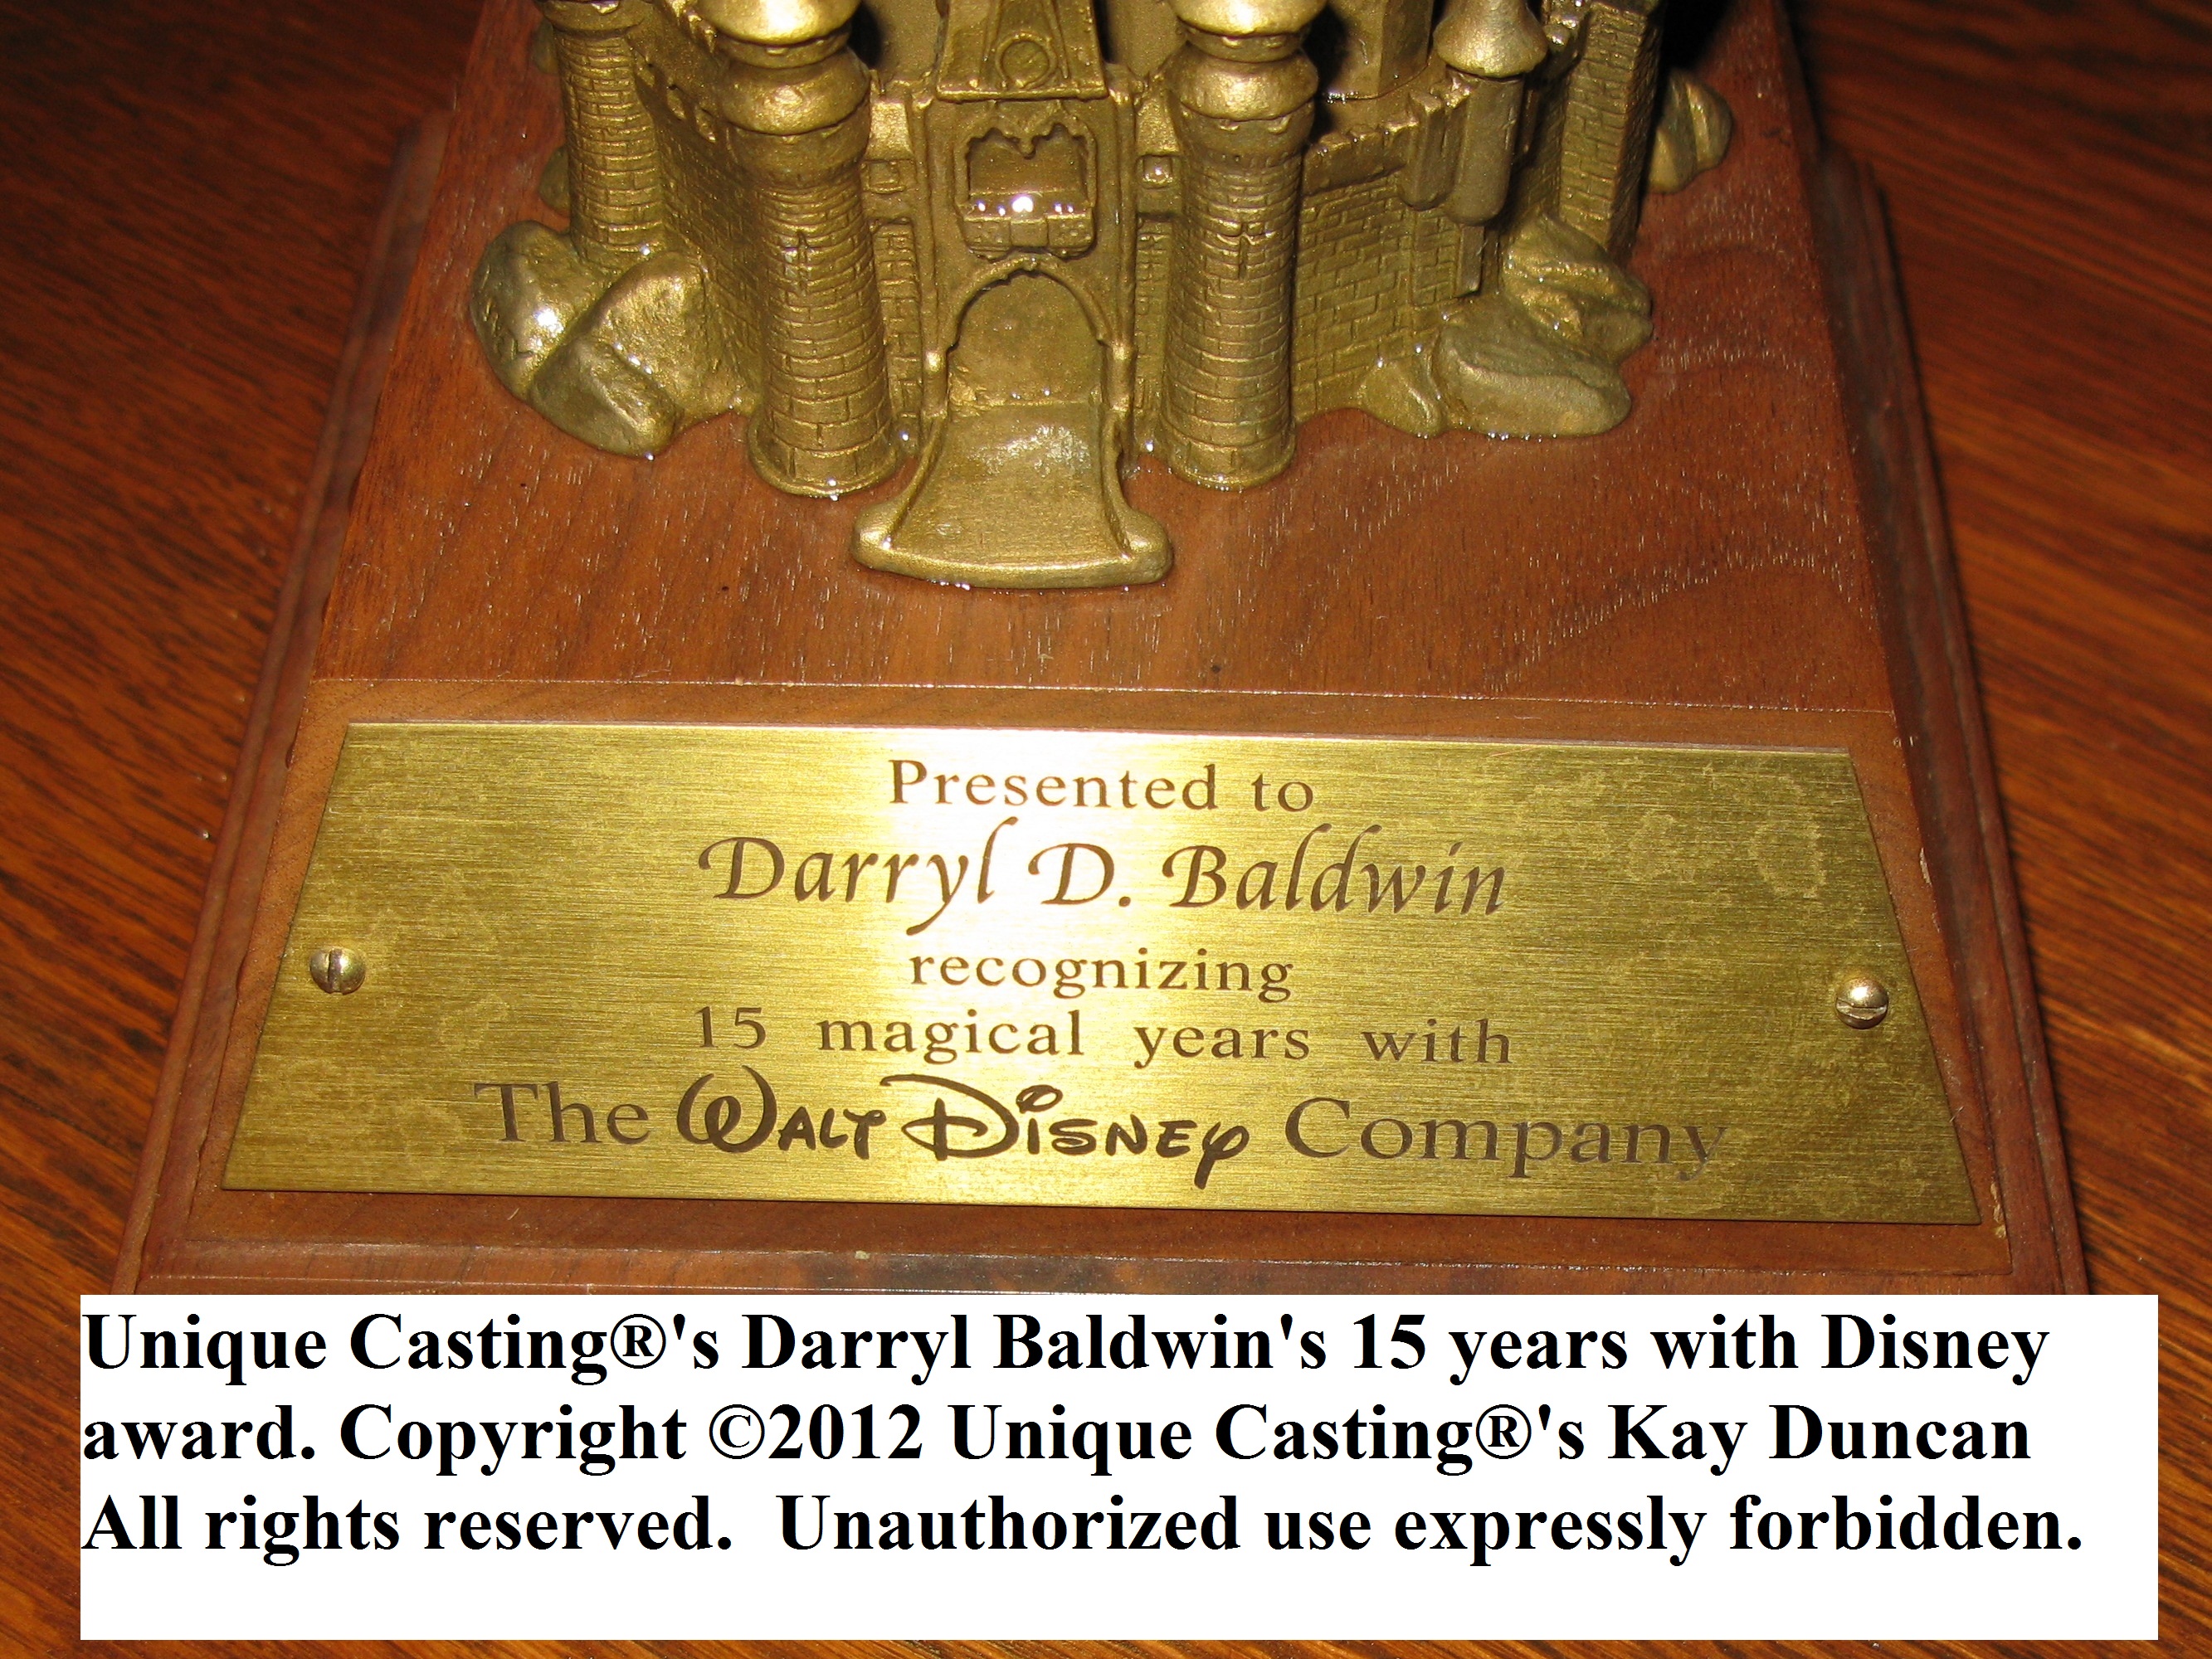 Unique Casting®'s Darryl Baldwin's 15 years with Disney award. Copyright ©2012 Unique Casting®'s Kay Duncan All rights reserved. Unauthorized use expressly forbidden.